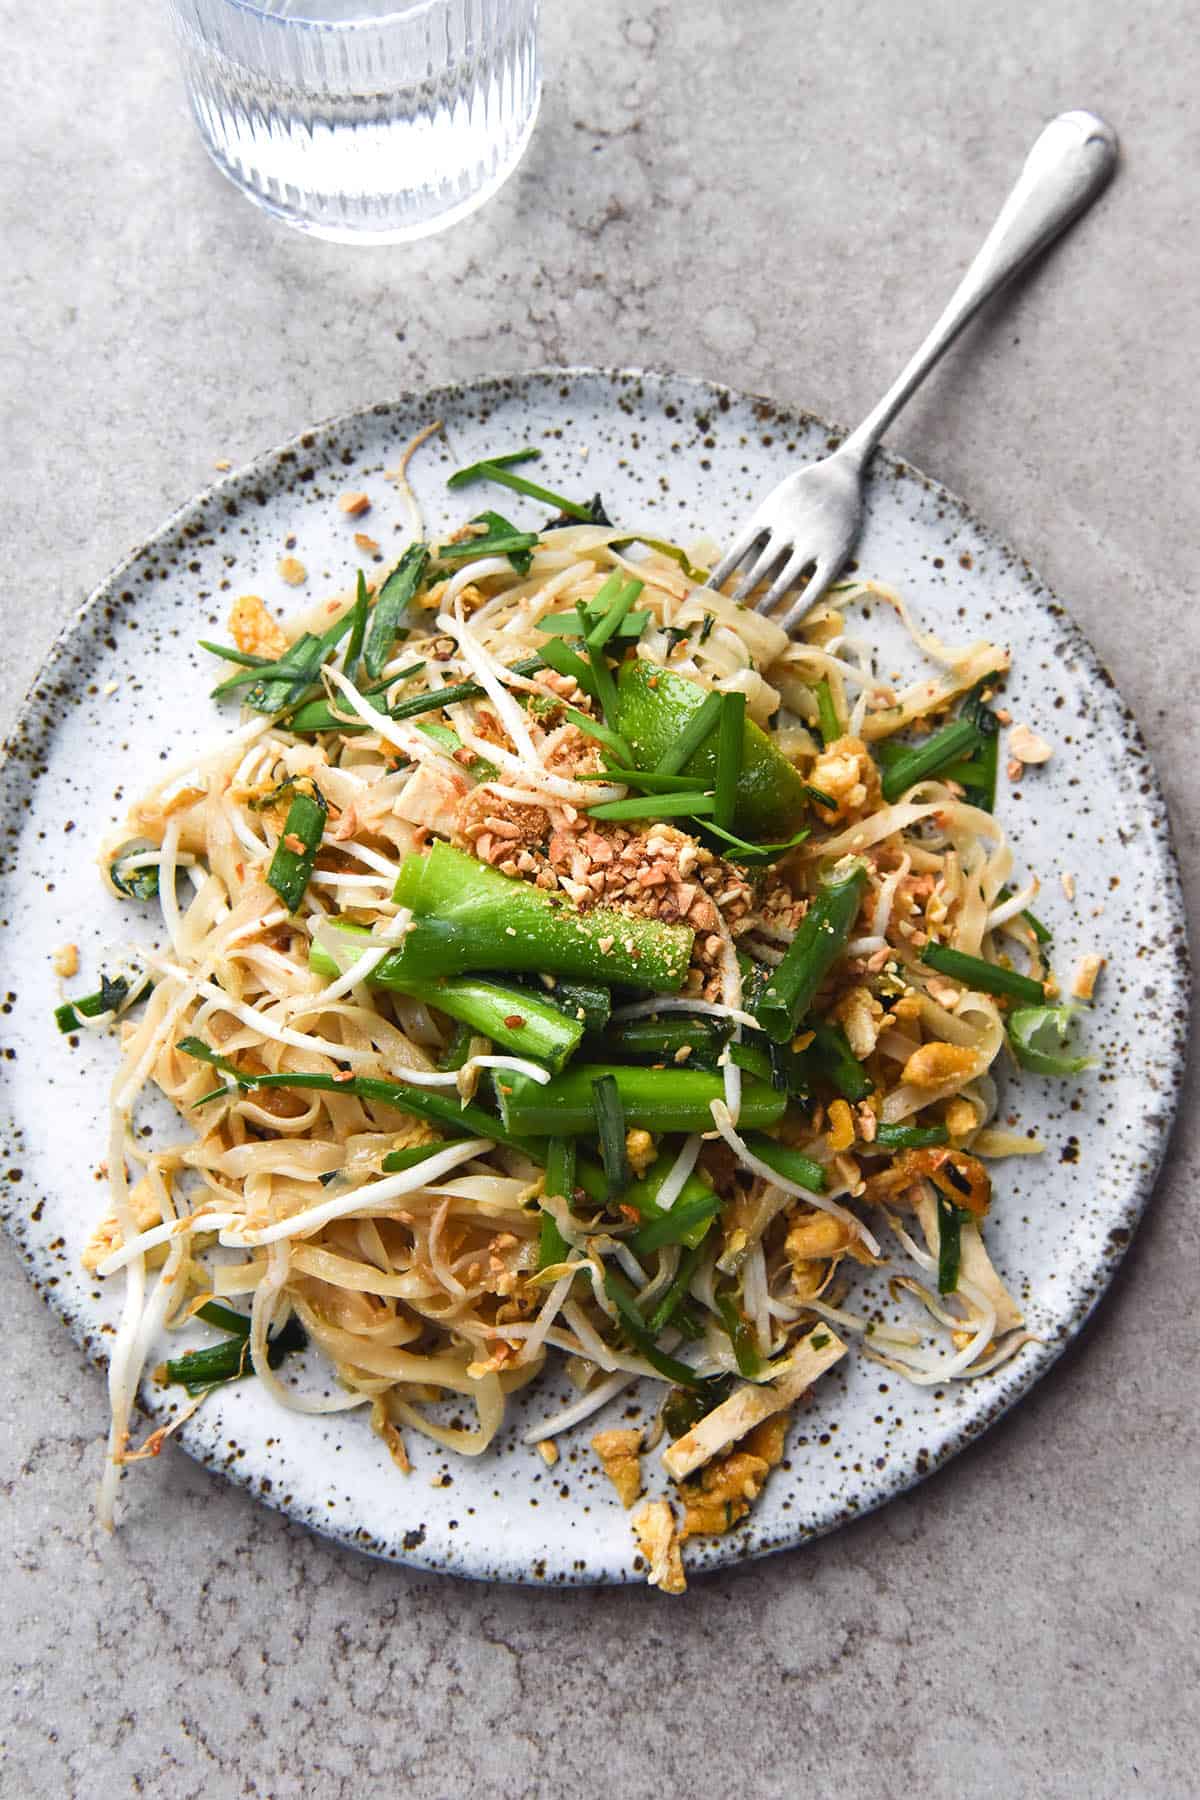 An aerial, light and breezy photo of FODMAP friendly Pad Thai. The Pad Thai sits atop a white speckled ceramic plate on a light grey backdrop. A fork sticks into the top right of the plate, and a glass of water sits to the top left. The Pad Thai is casually arranged and topped with spring onion greens, bean sprouts and toasted peanuts